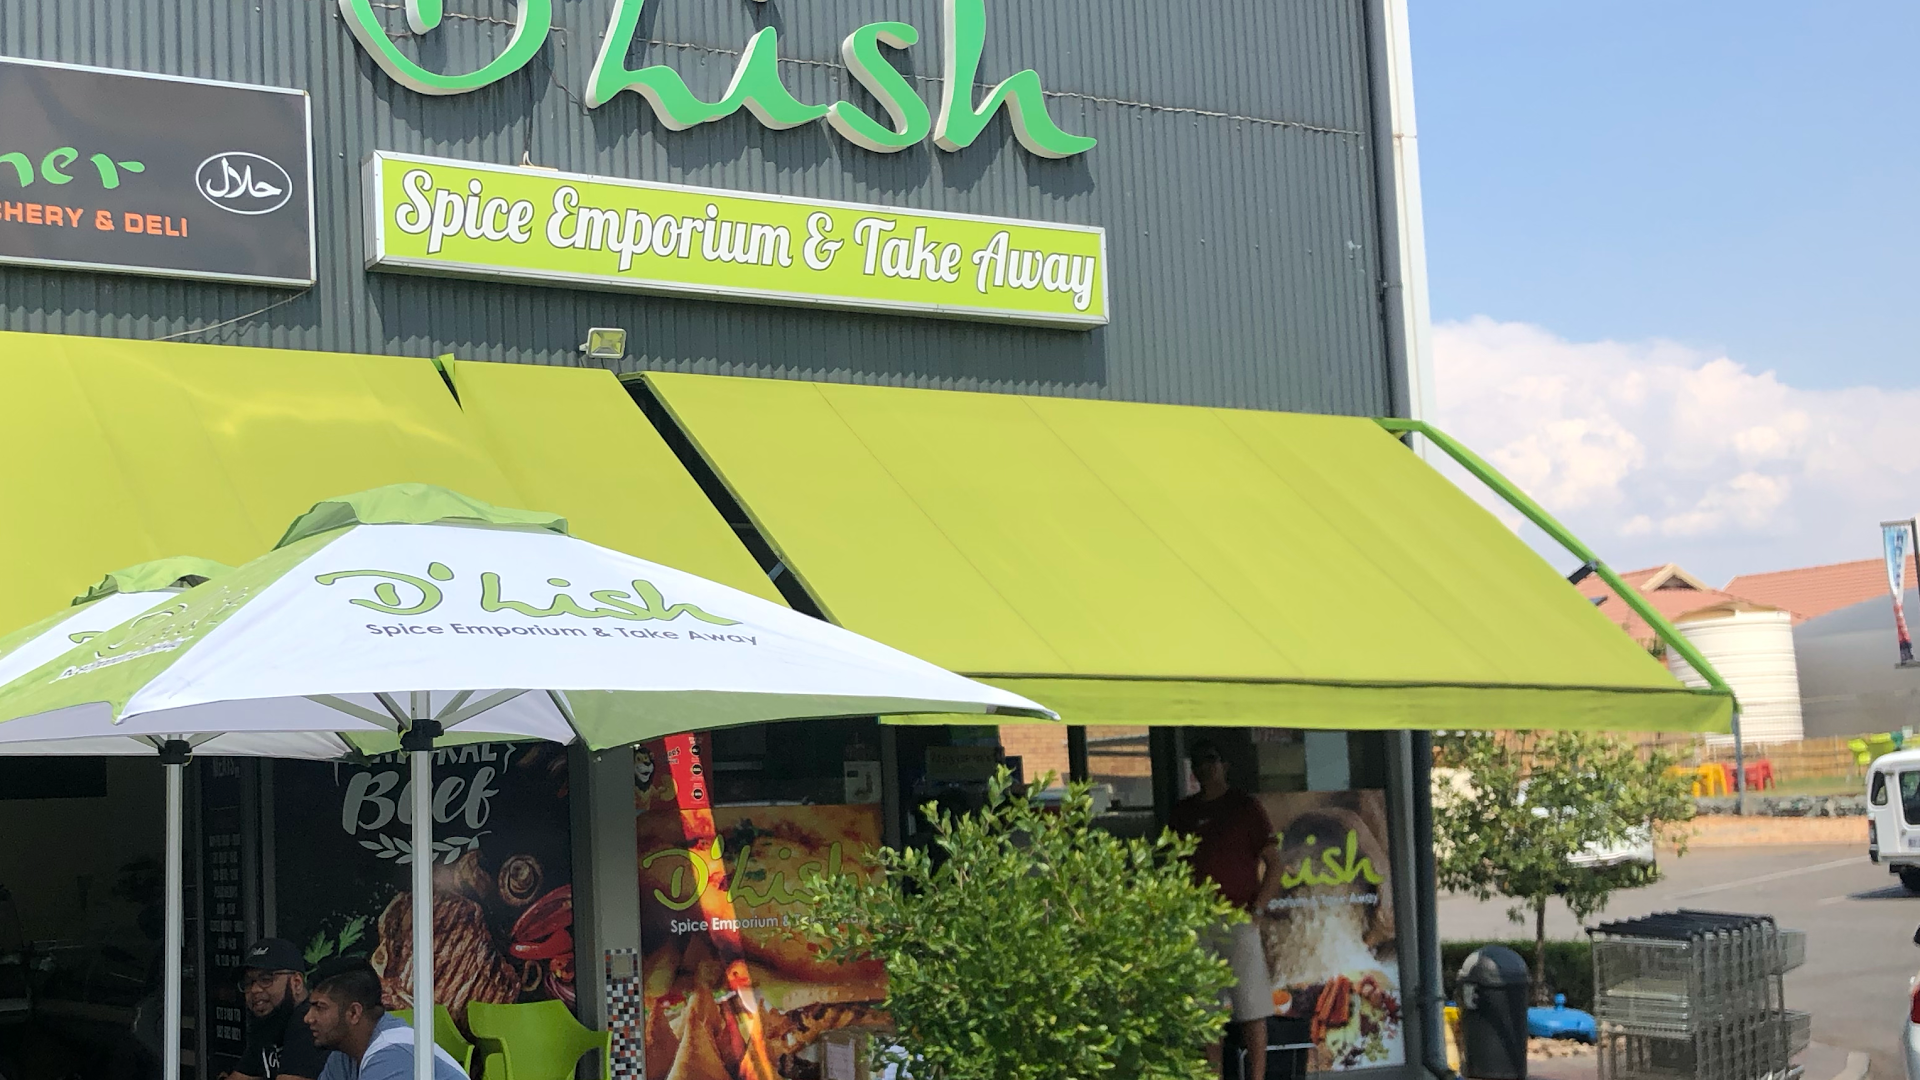 D’Lish Spice Emporium and Take Away